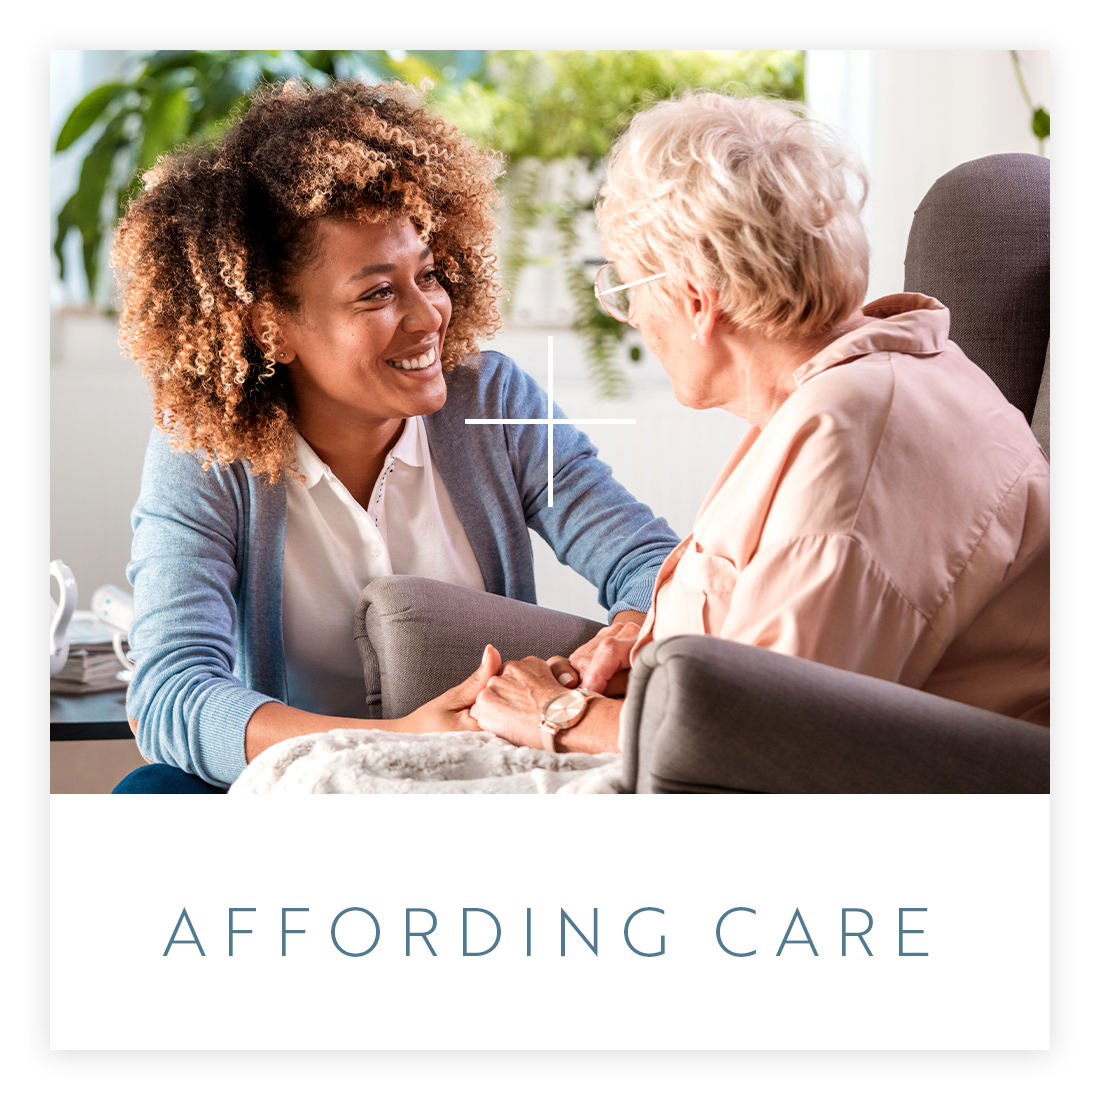 Learn about affording care at Estancia Senior Living in Fallbrook, California